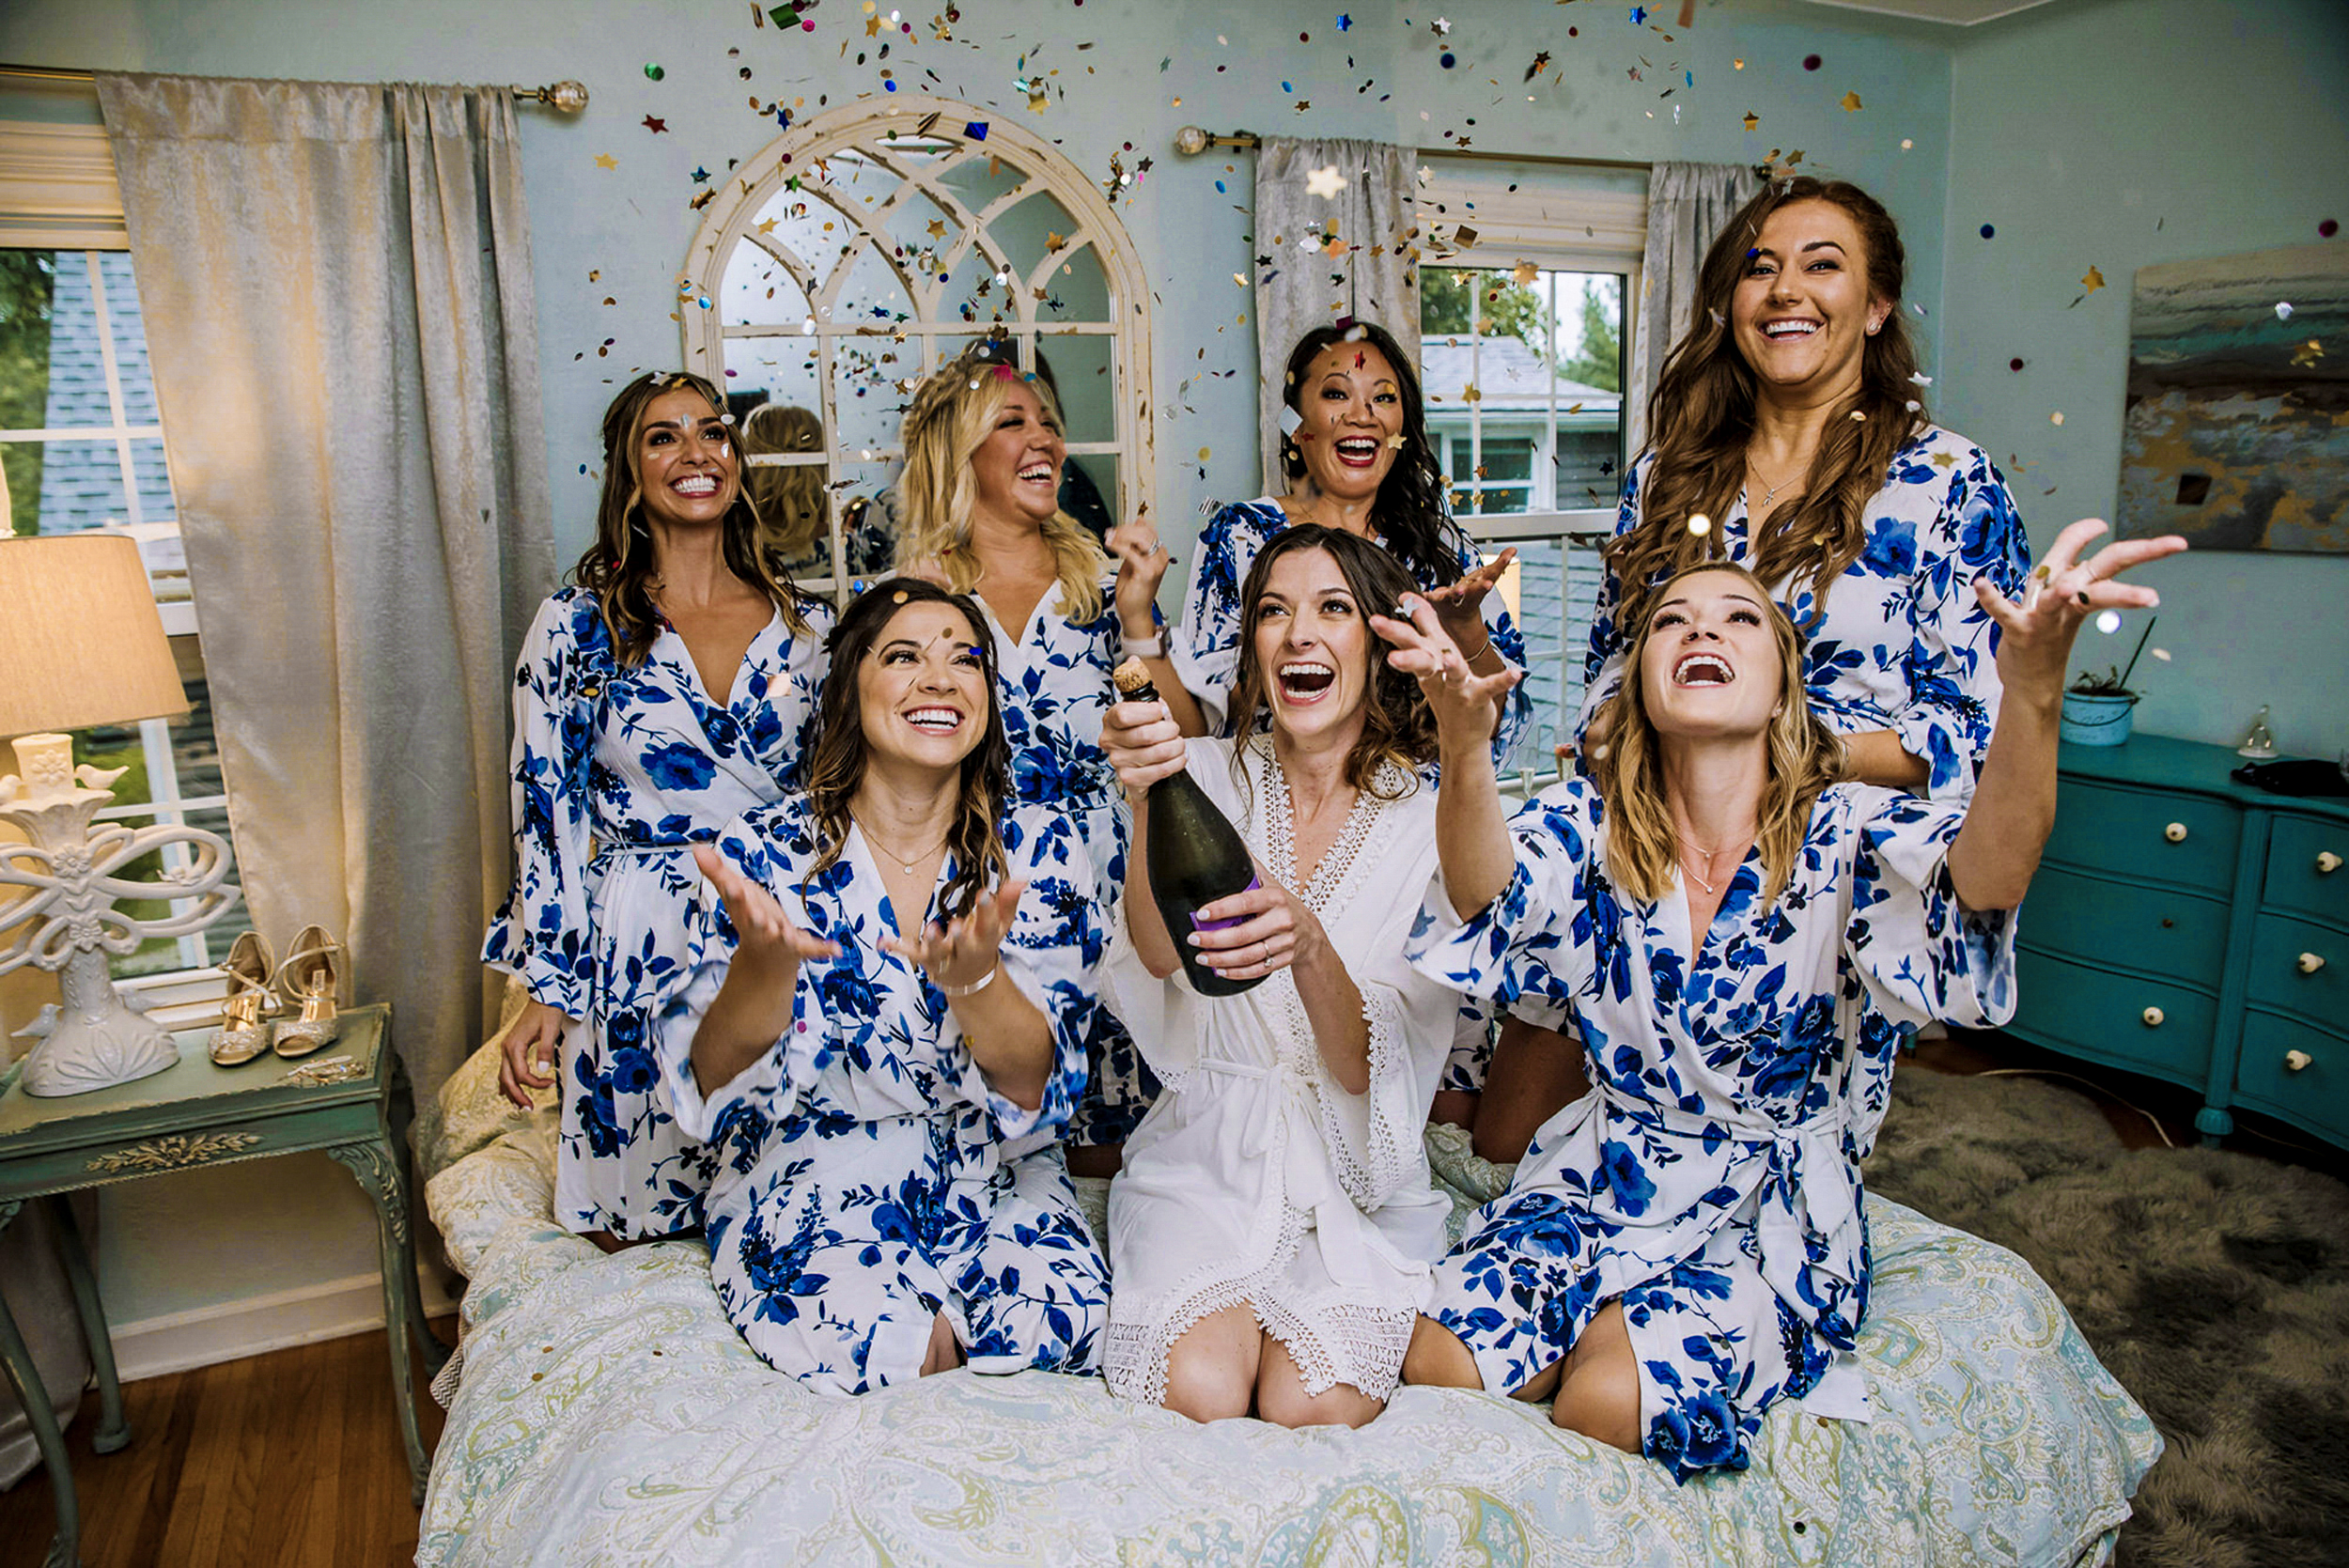 How to be a Bridesmaid